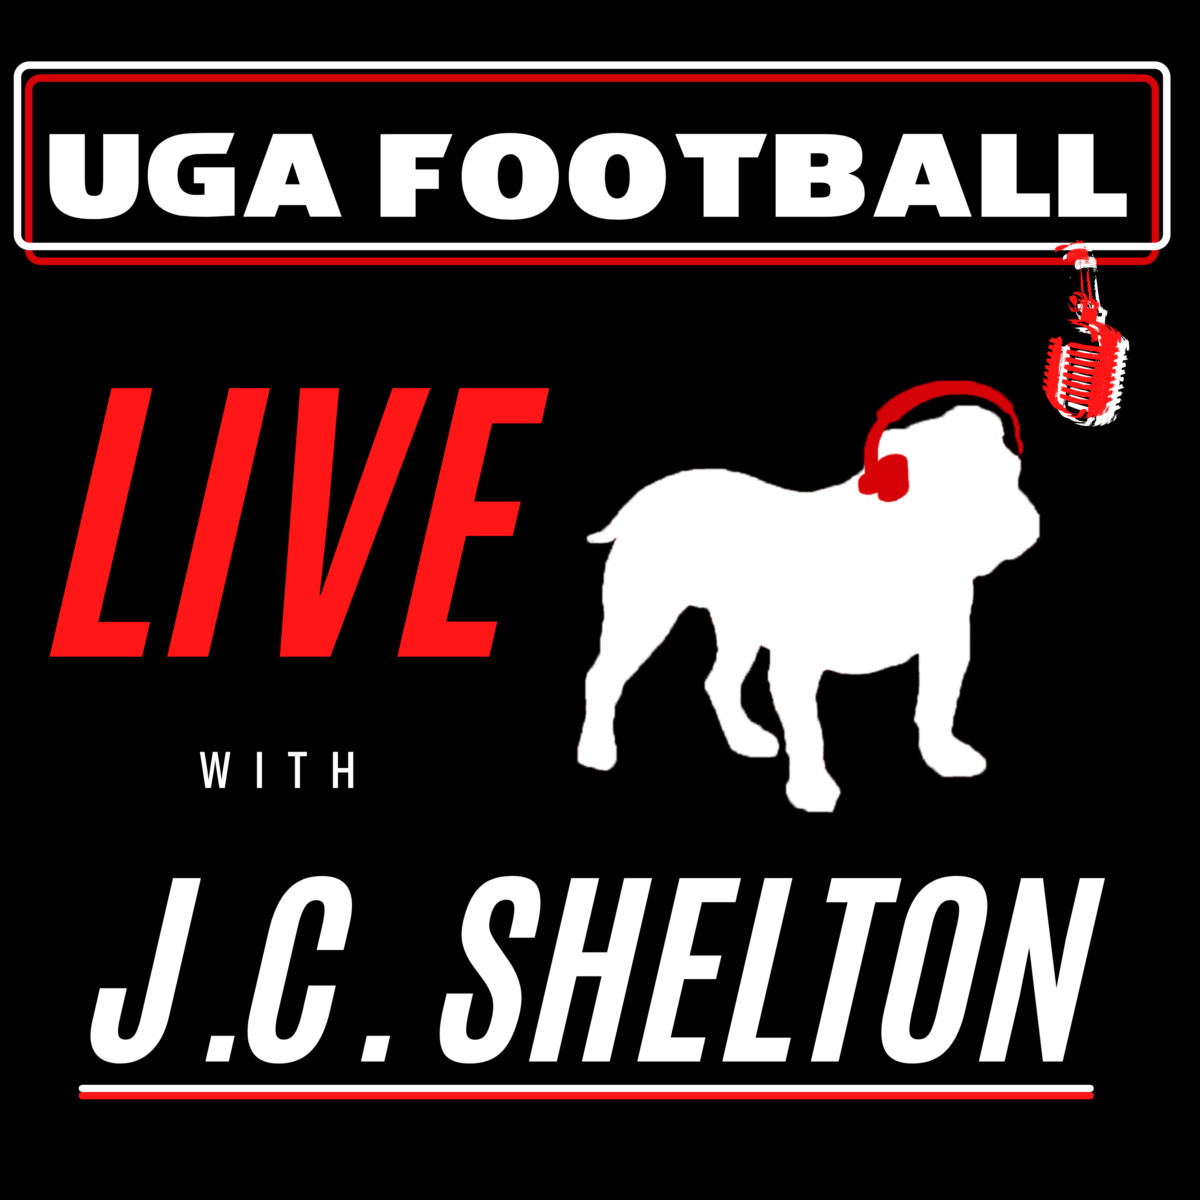 ‘UGA Football Live with J.C. Shelton’: Pays to Know Your Opponent